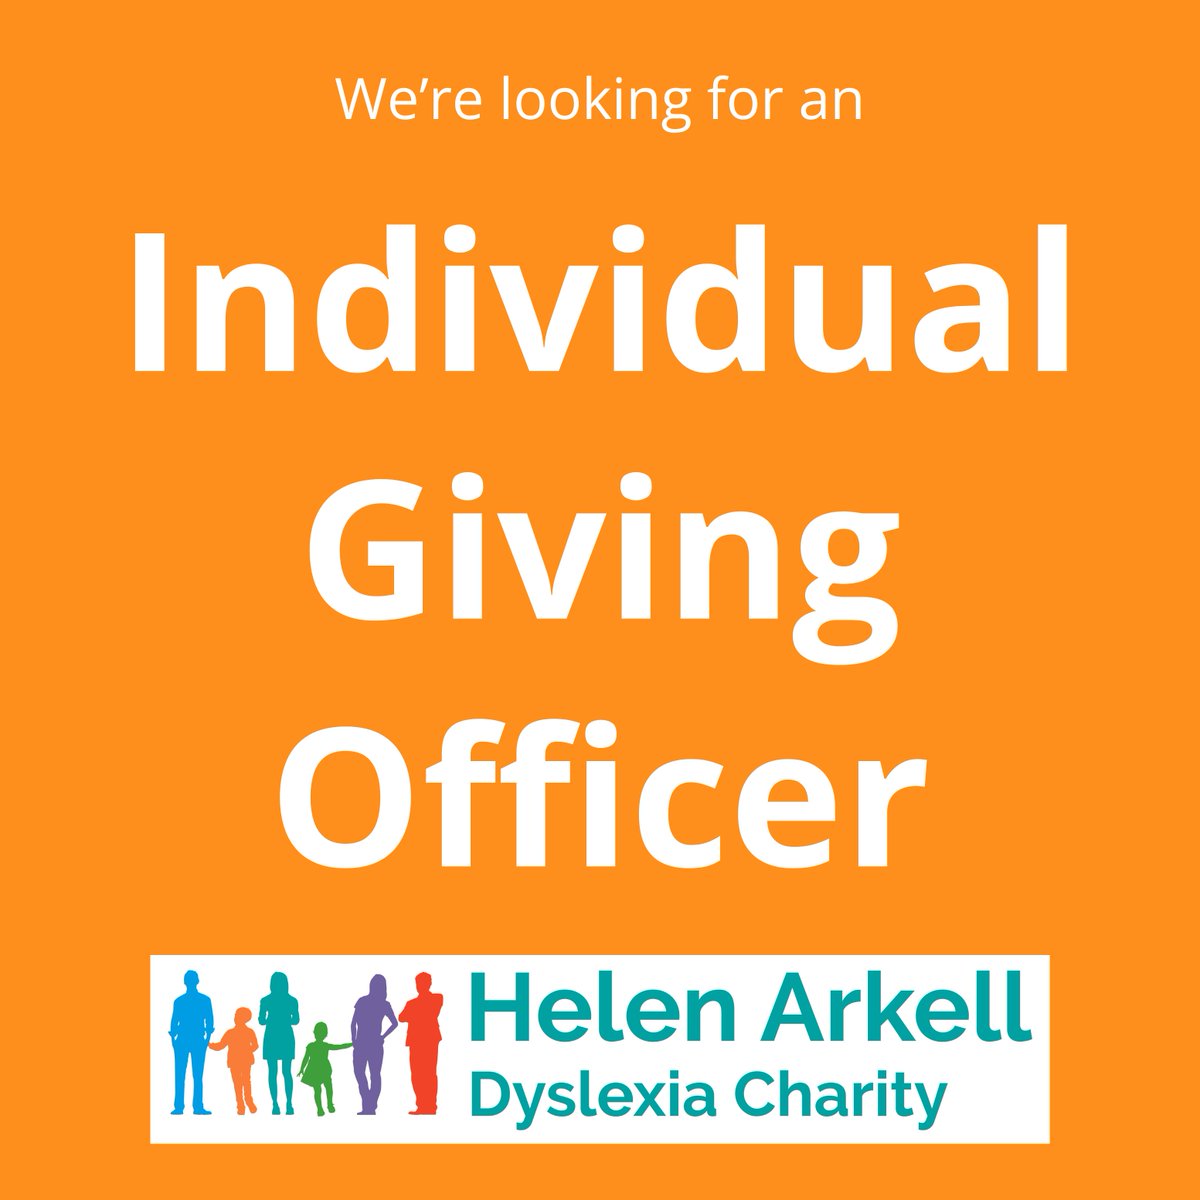 Closing soon! Are you an enthusiastic fundraising professional? We would love you to join our small and friendly team here at Helen Arkell. Applications close Wednesday 8 May.

👉 helenarkell.org.uk/about-us/work-…

#recruitment #charityjobs #fundraisingjobs #vacancies #dyslexia